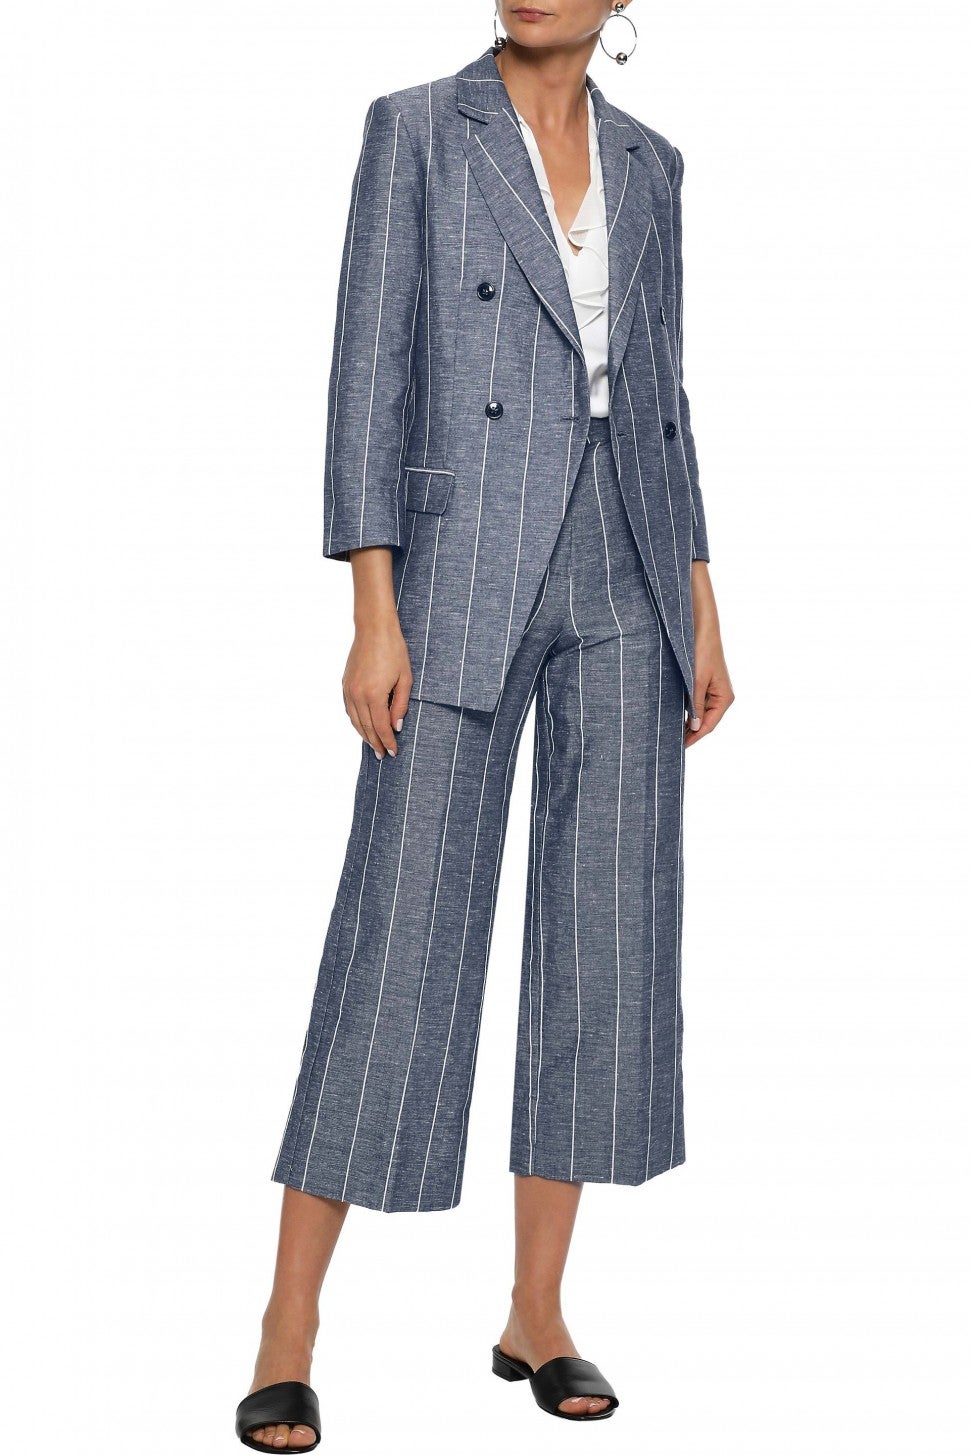 Iris and Ink pinstripe culotte suit